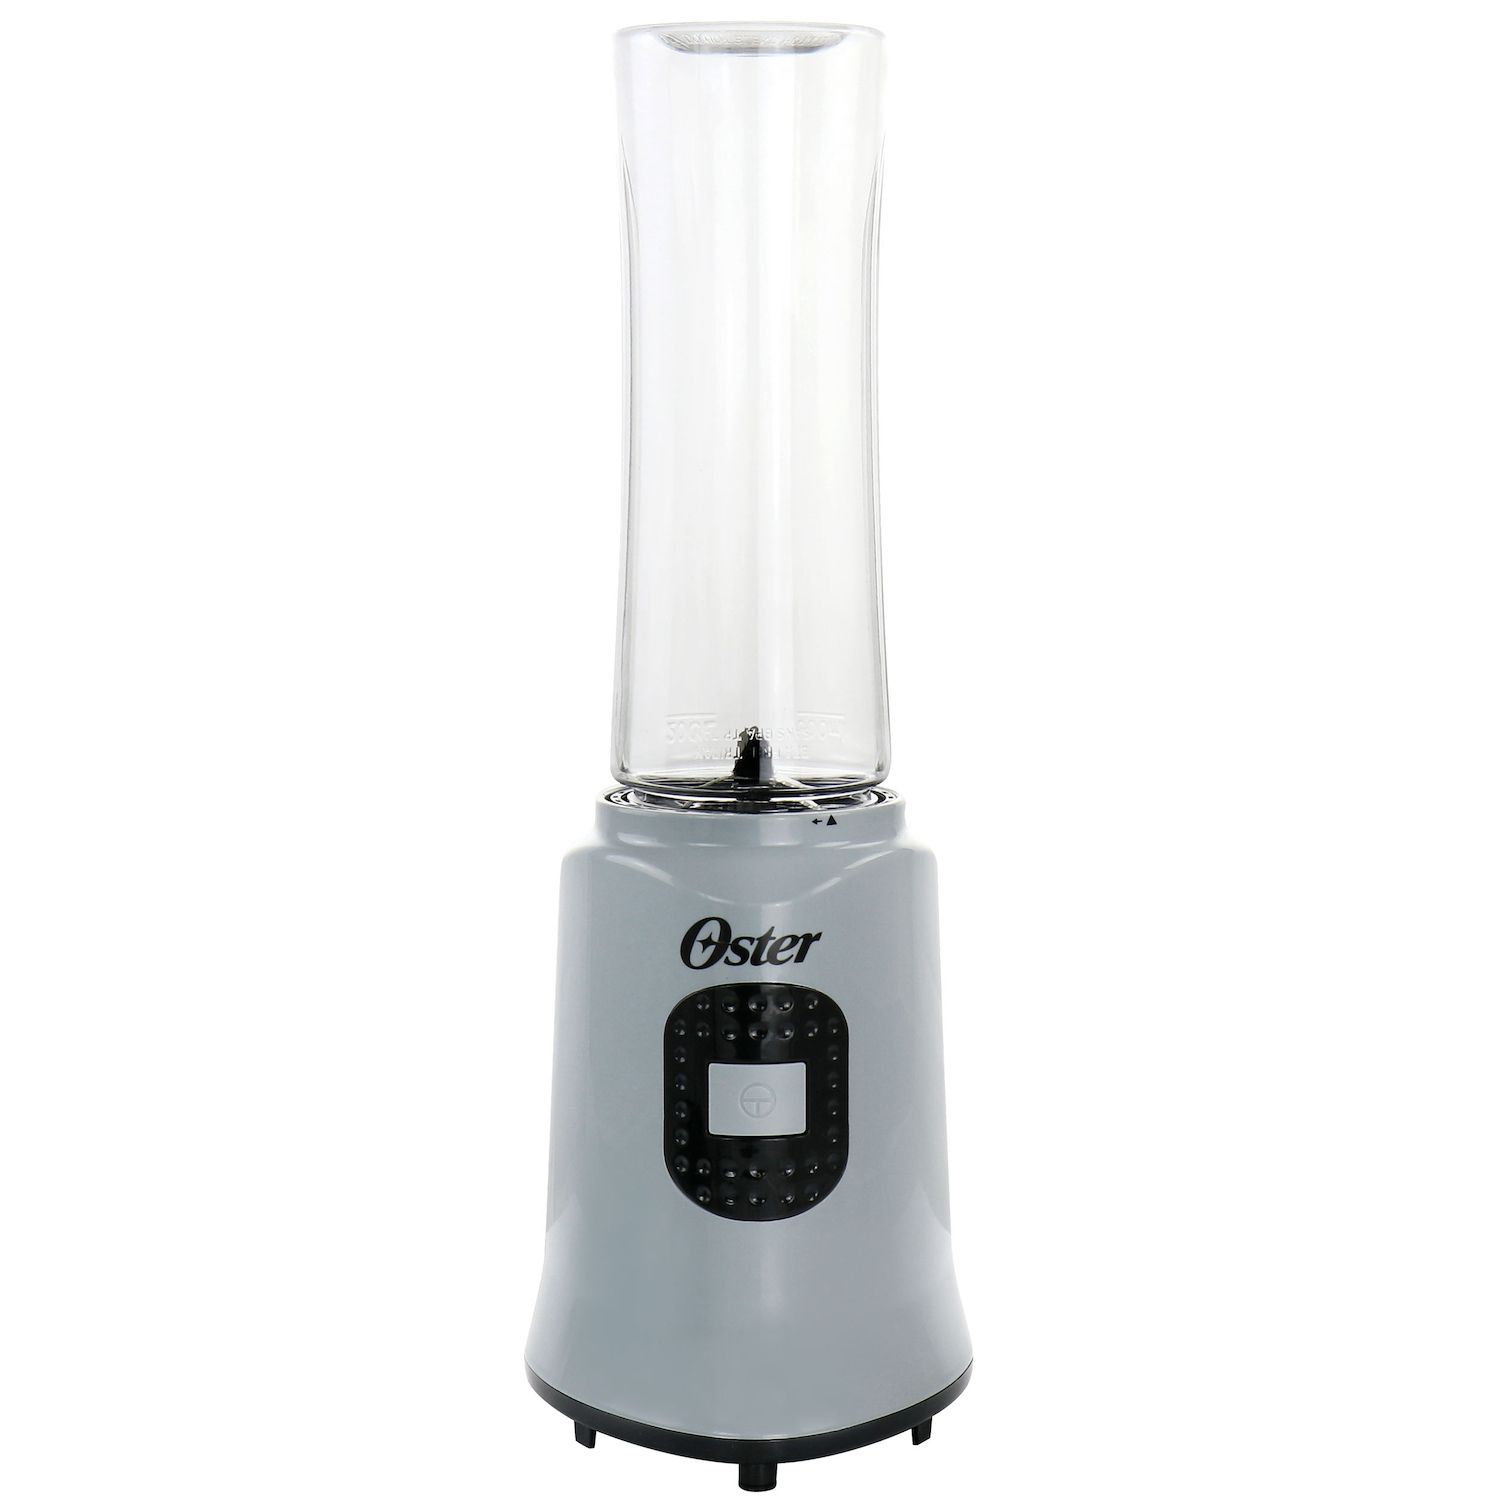 Oster Blend Active Portable Blender with Drinking Lid, USB Gray- New In Box